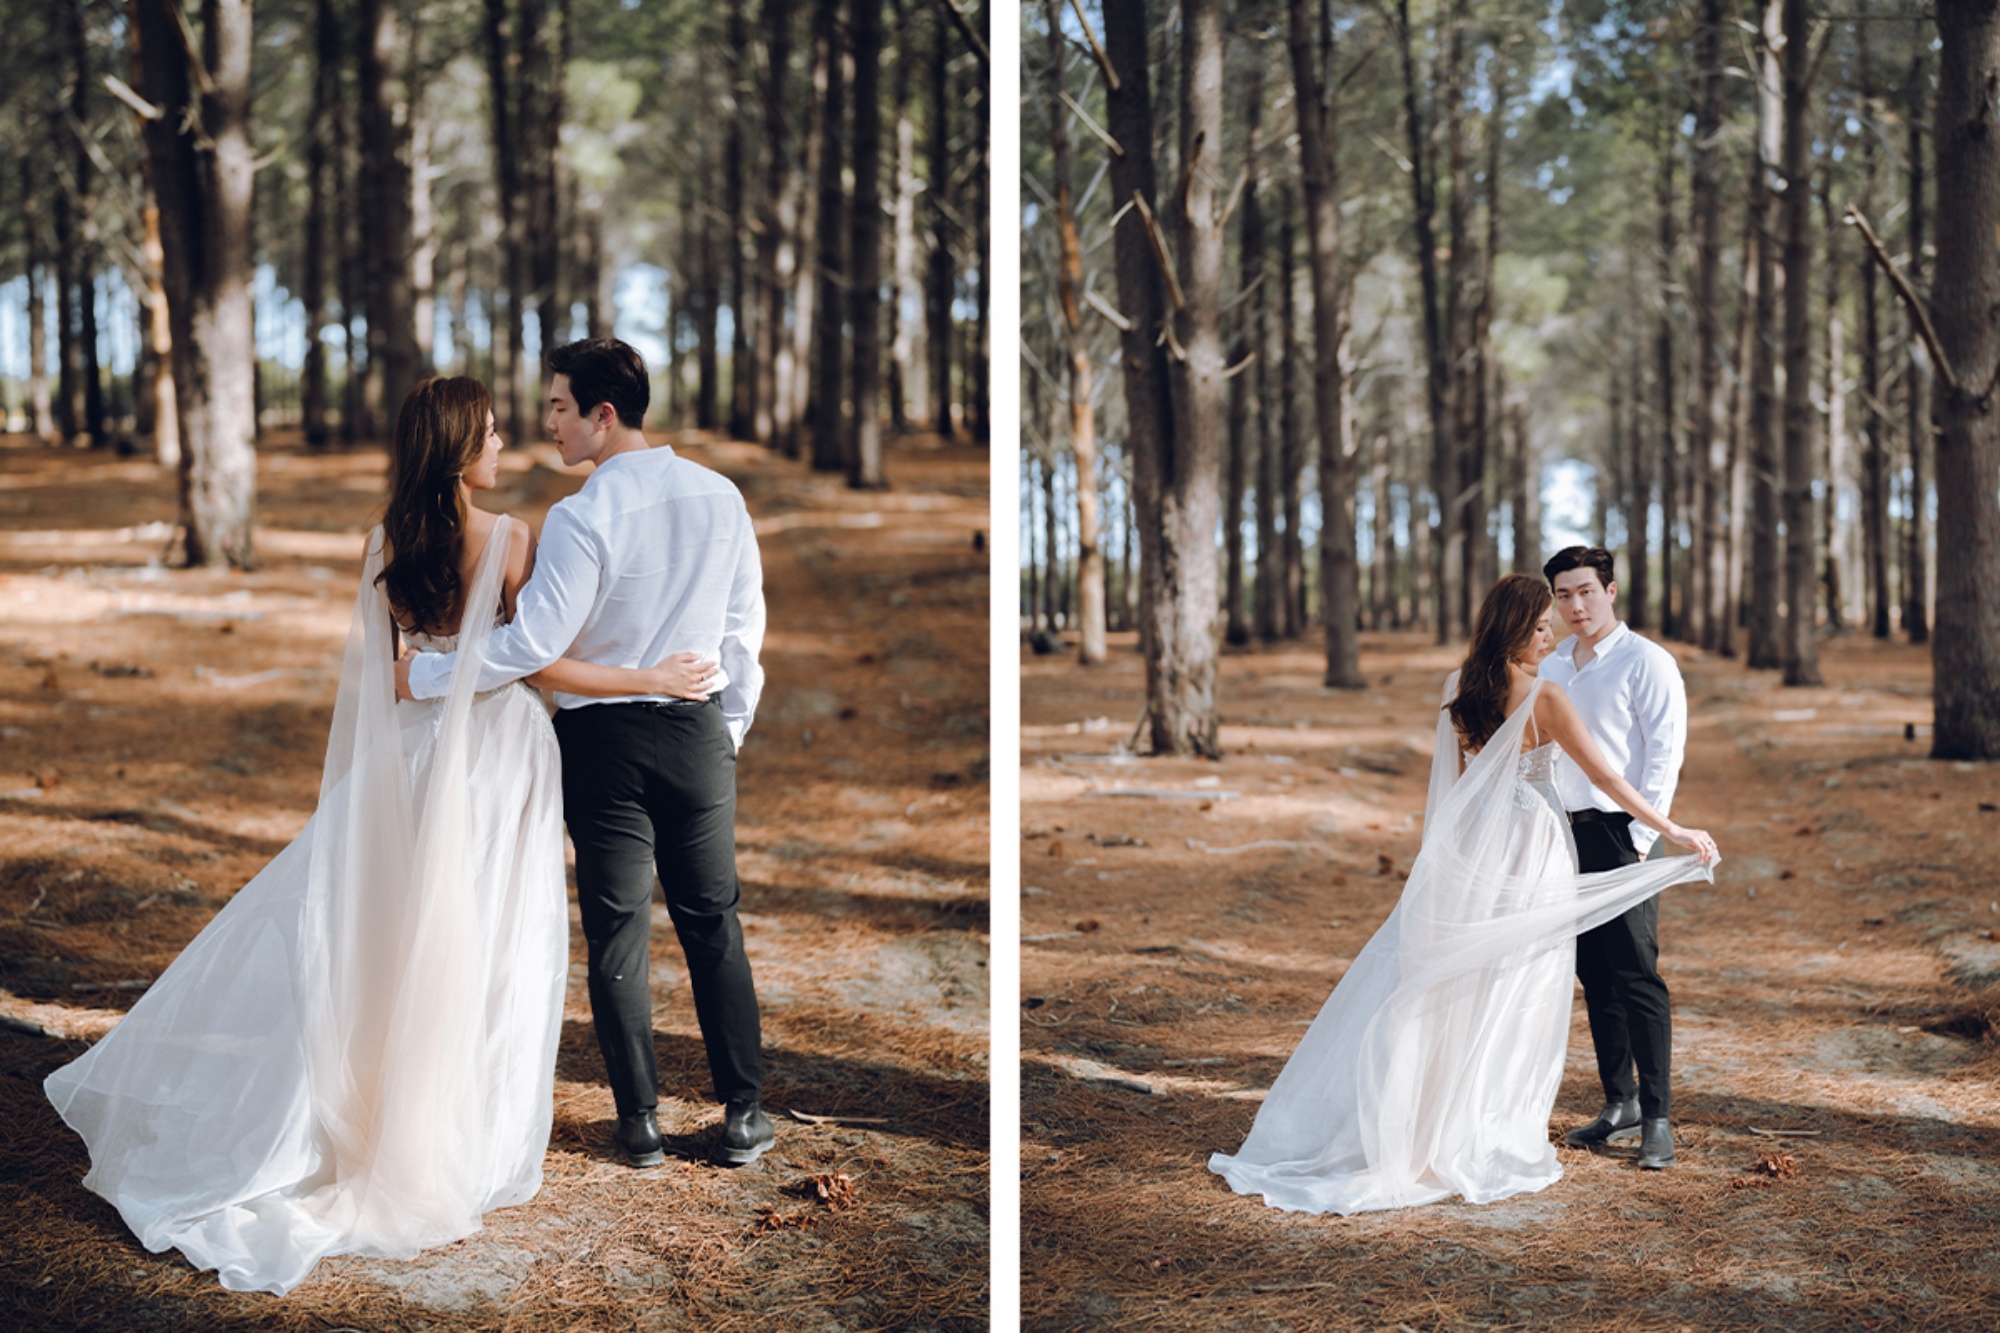 Capturing Forever in Perth: Jasmine & Kamui's Pre-Wedding Story by Jimmy on OneThreeOneFour 2